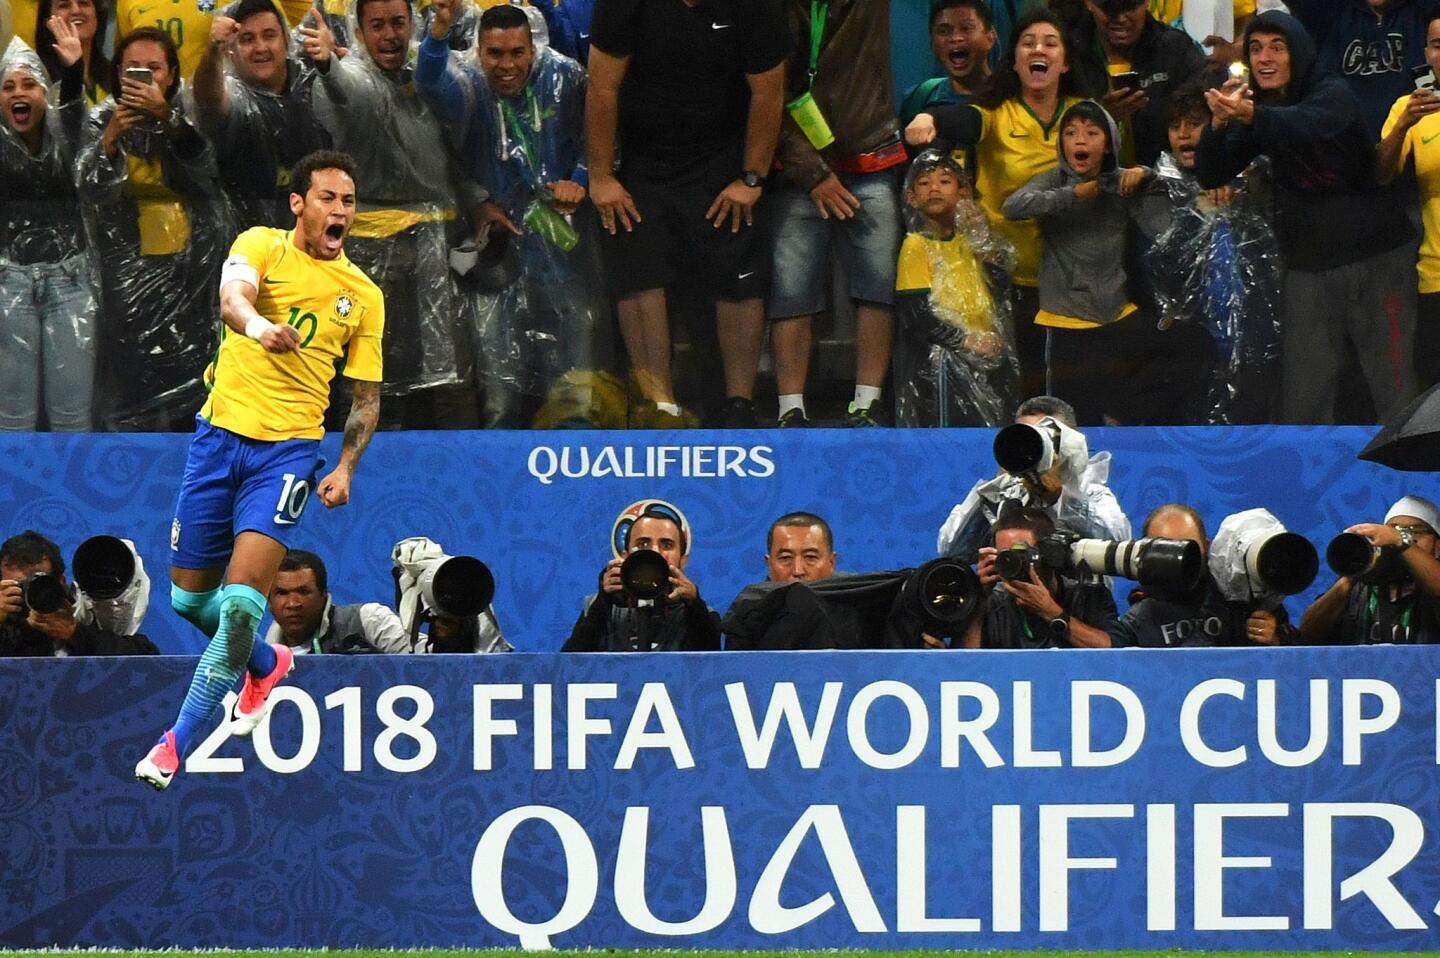 Brazil's forward Neymar celebrates after scoring against Paraguay during their 2018 FIFA World Cup qualifier football match in Sao Paulo, Brazil on March 28, 2017. / AFP PHOTO / NELSON ALMEIDANELSON ALMEIDA/AFP/Getty Images ** OUTS - ELSENT, FPG, CM - OUTS * NM, PH, VA if sourced by CT, LA or MoD **